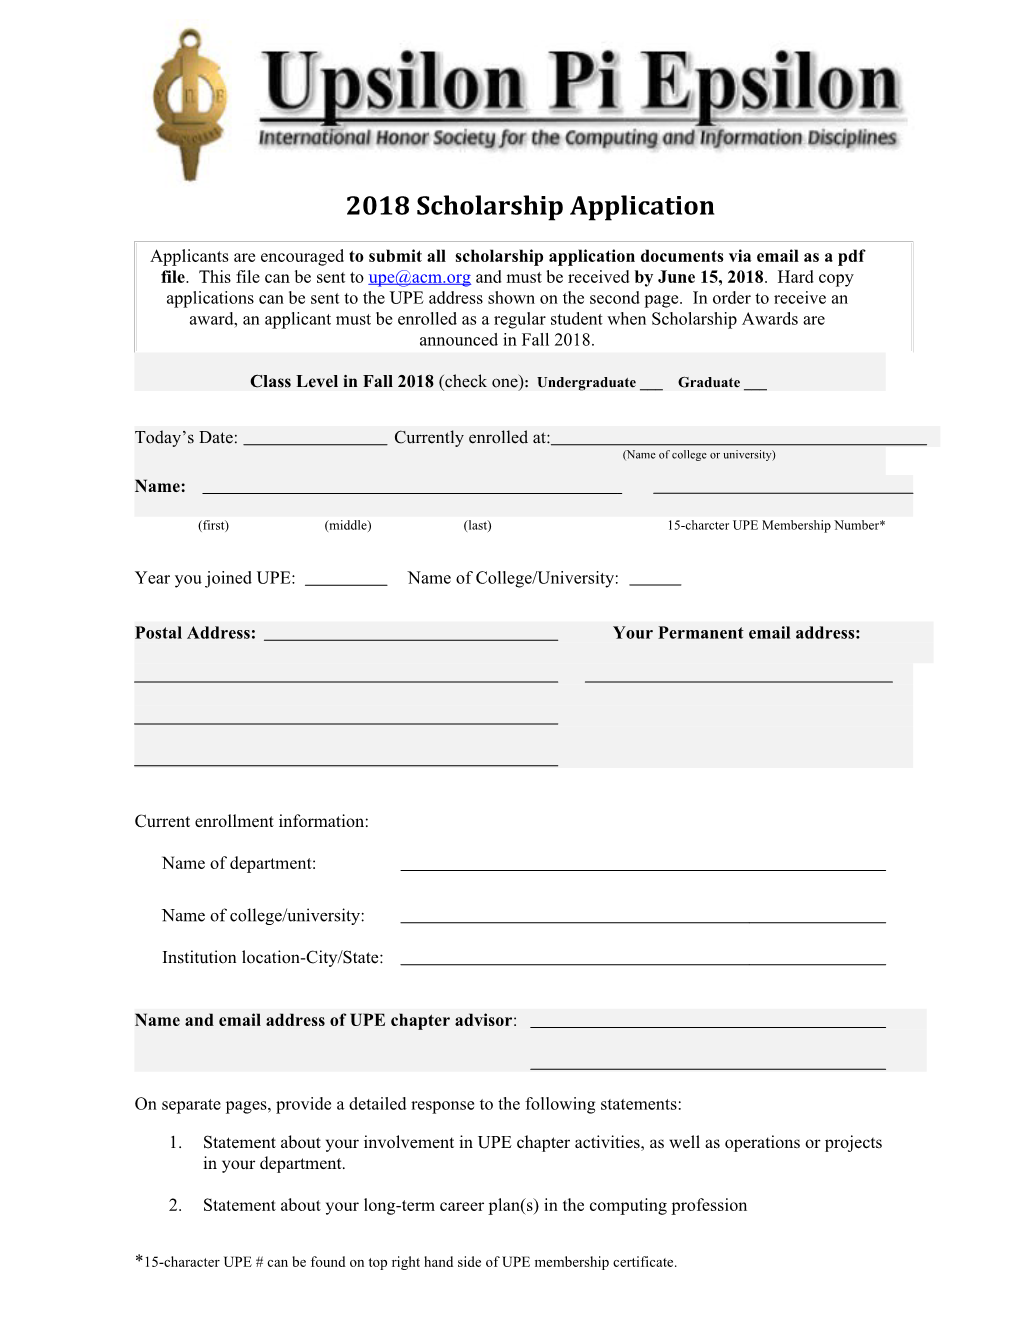 UPE Scholarship Application